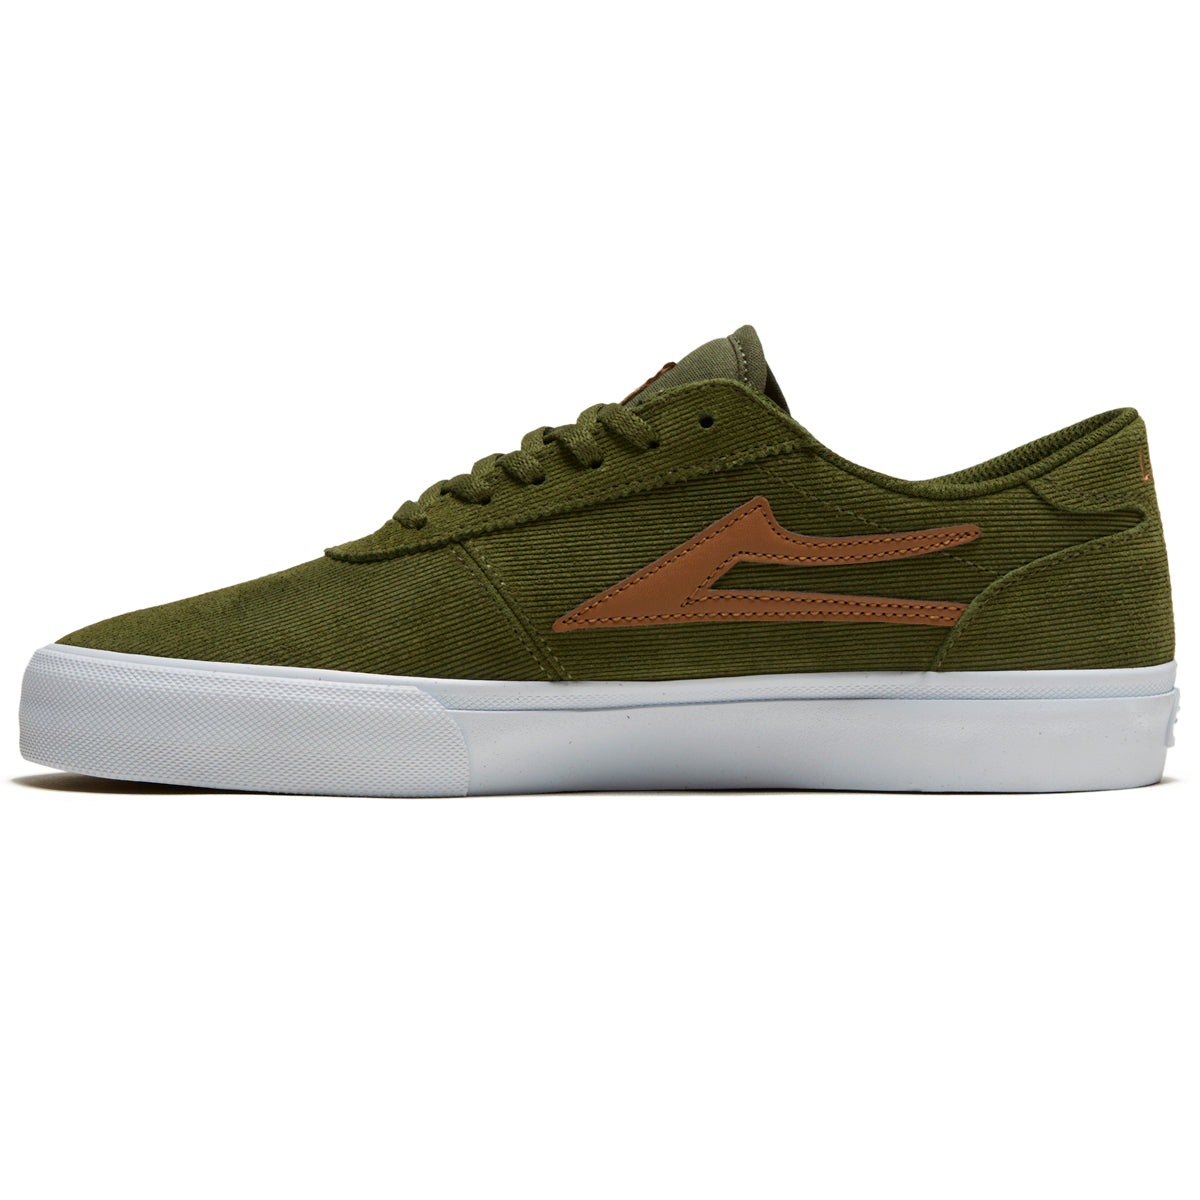 Lakai Manchester Shoes - Olive Cord Suede image 2